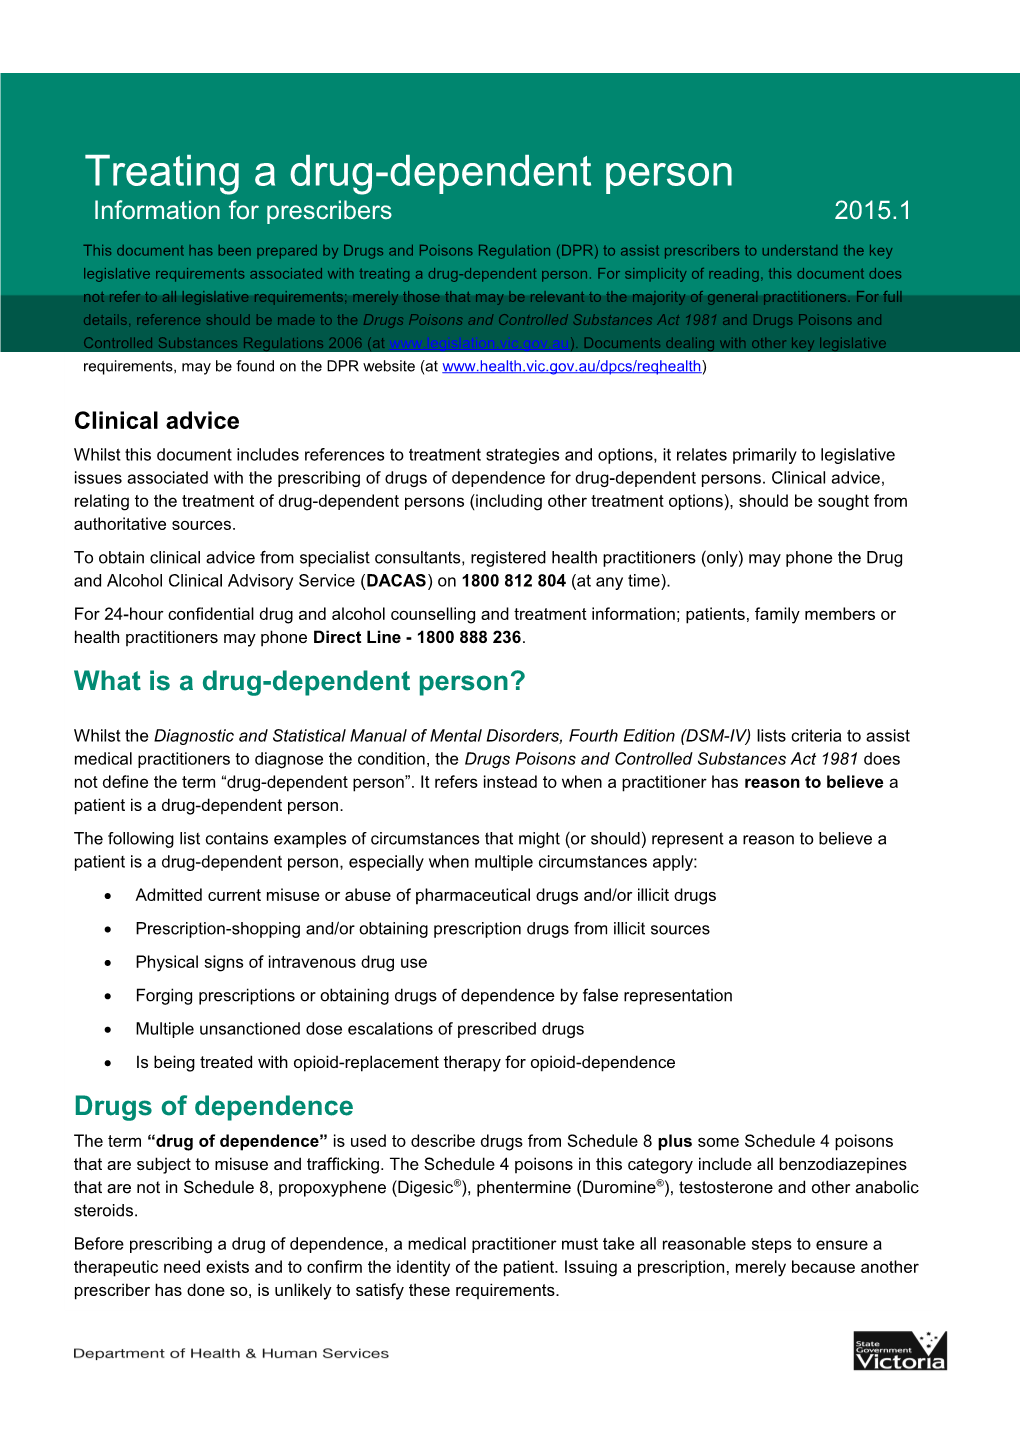 Treating a Drug-Dependent Person